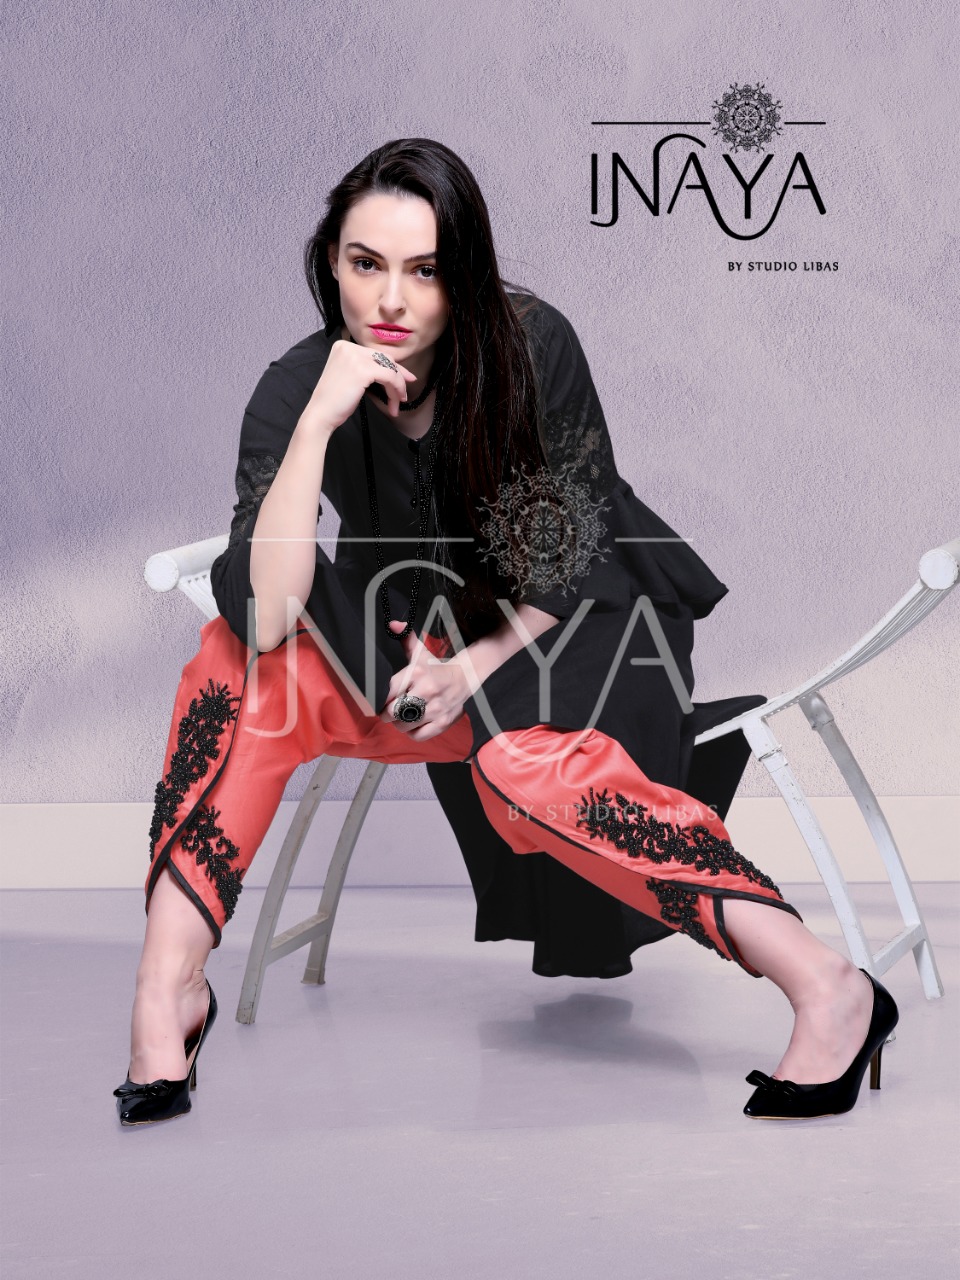 Inaya by studio libas presents luxury pret collection 7 Special designer festive collection of kurti style tunic with culottes pants concept